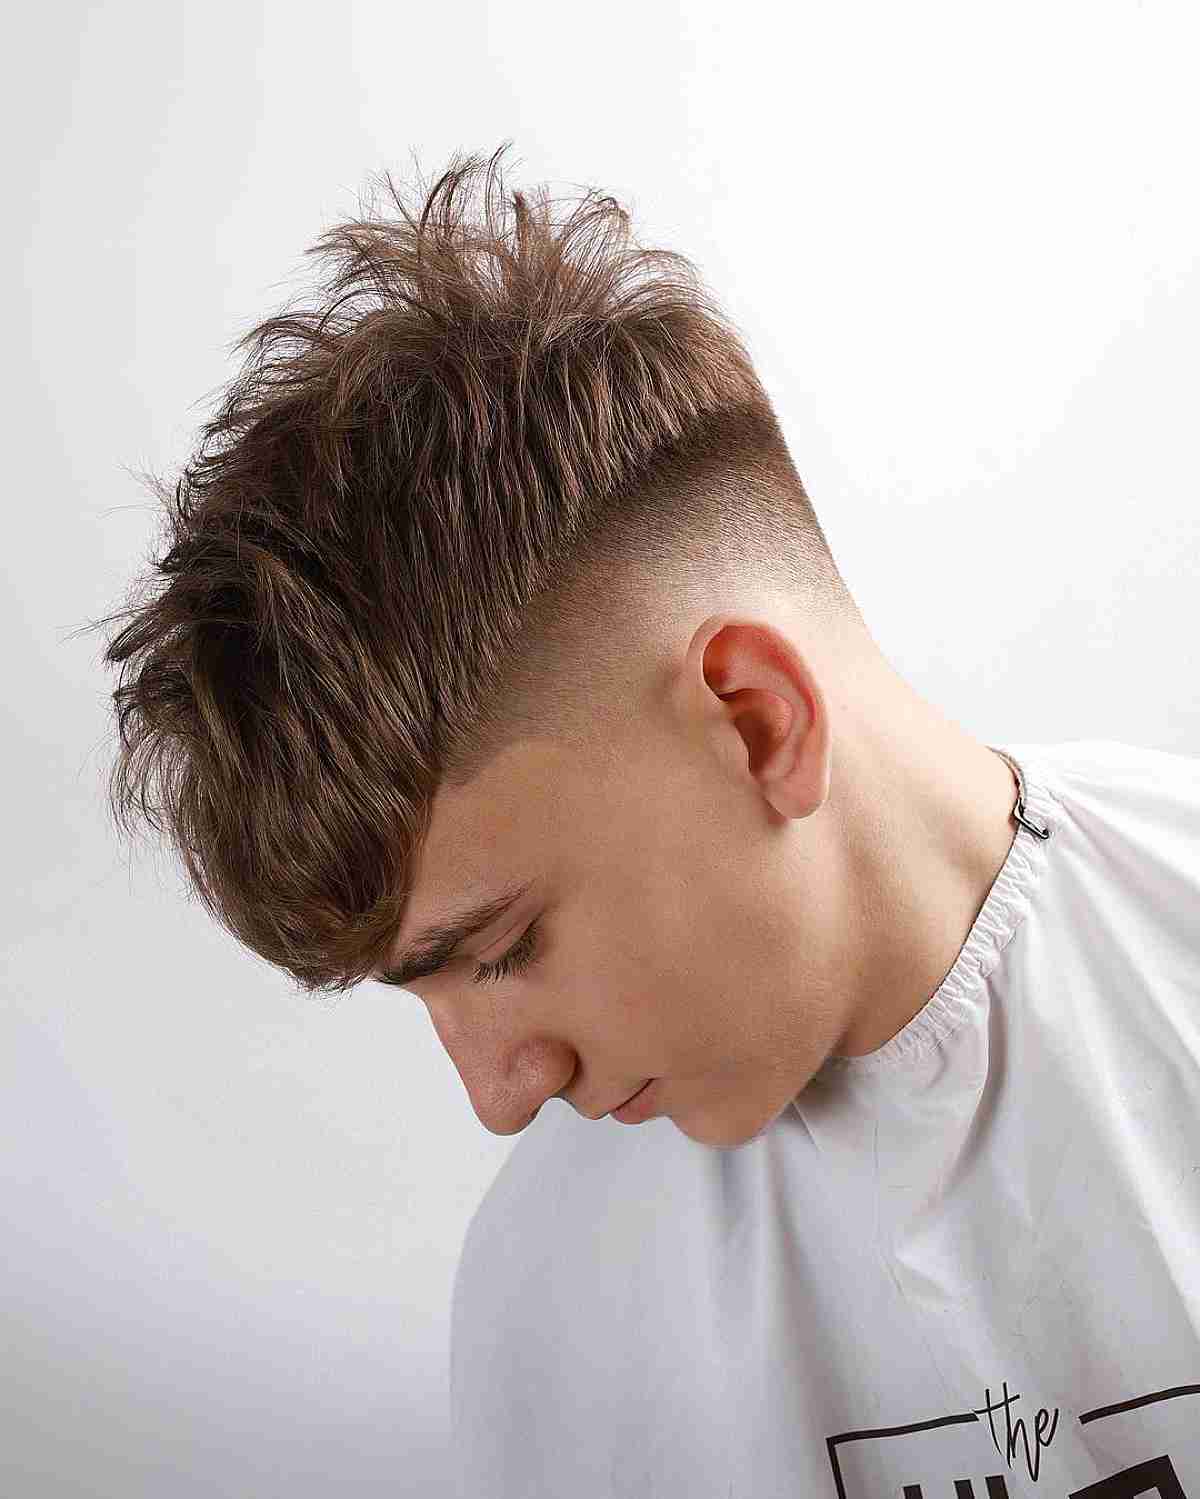 Black Hairstyles For Men 2019 Best Of Haircuts Men Haircuts Background,  Pictures Of Black Men S Haircuts Background Image And Wallpaper for Free  Download